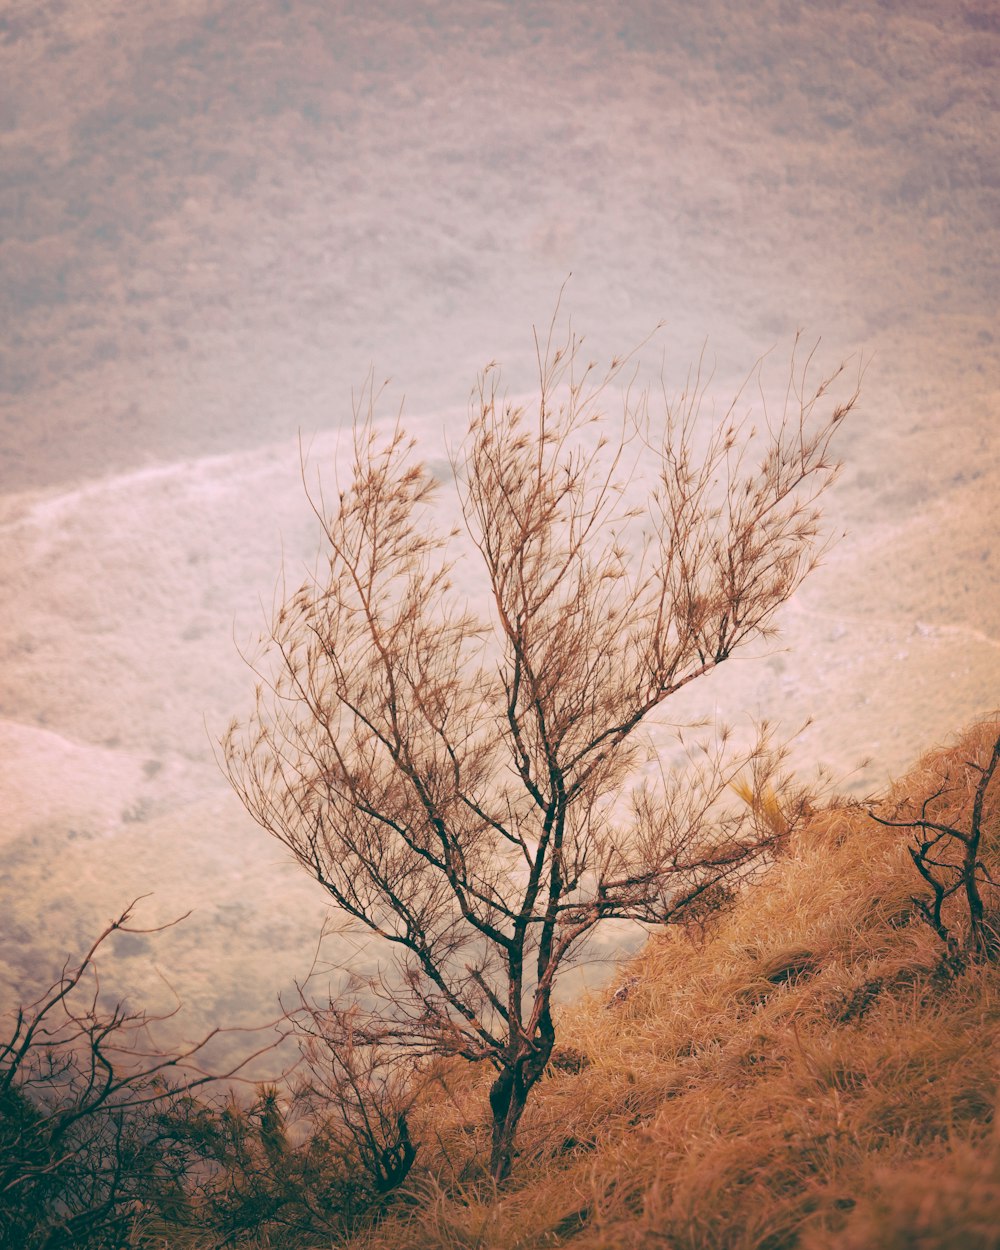 a lone tree on the side of a hill